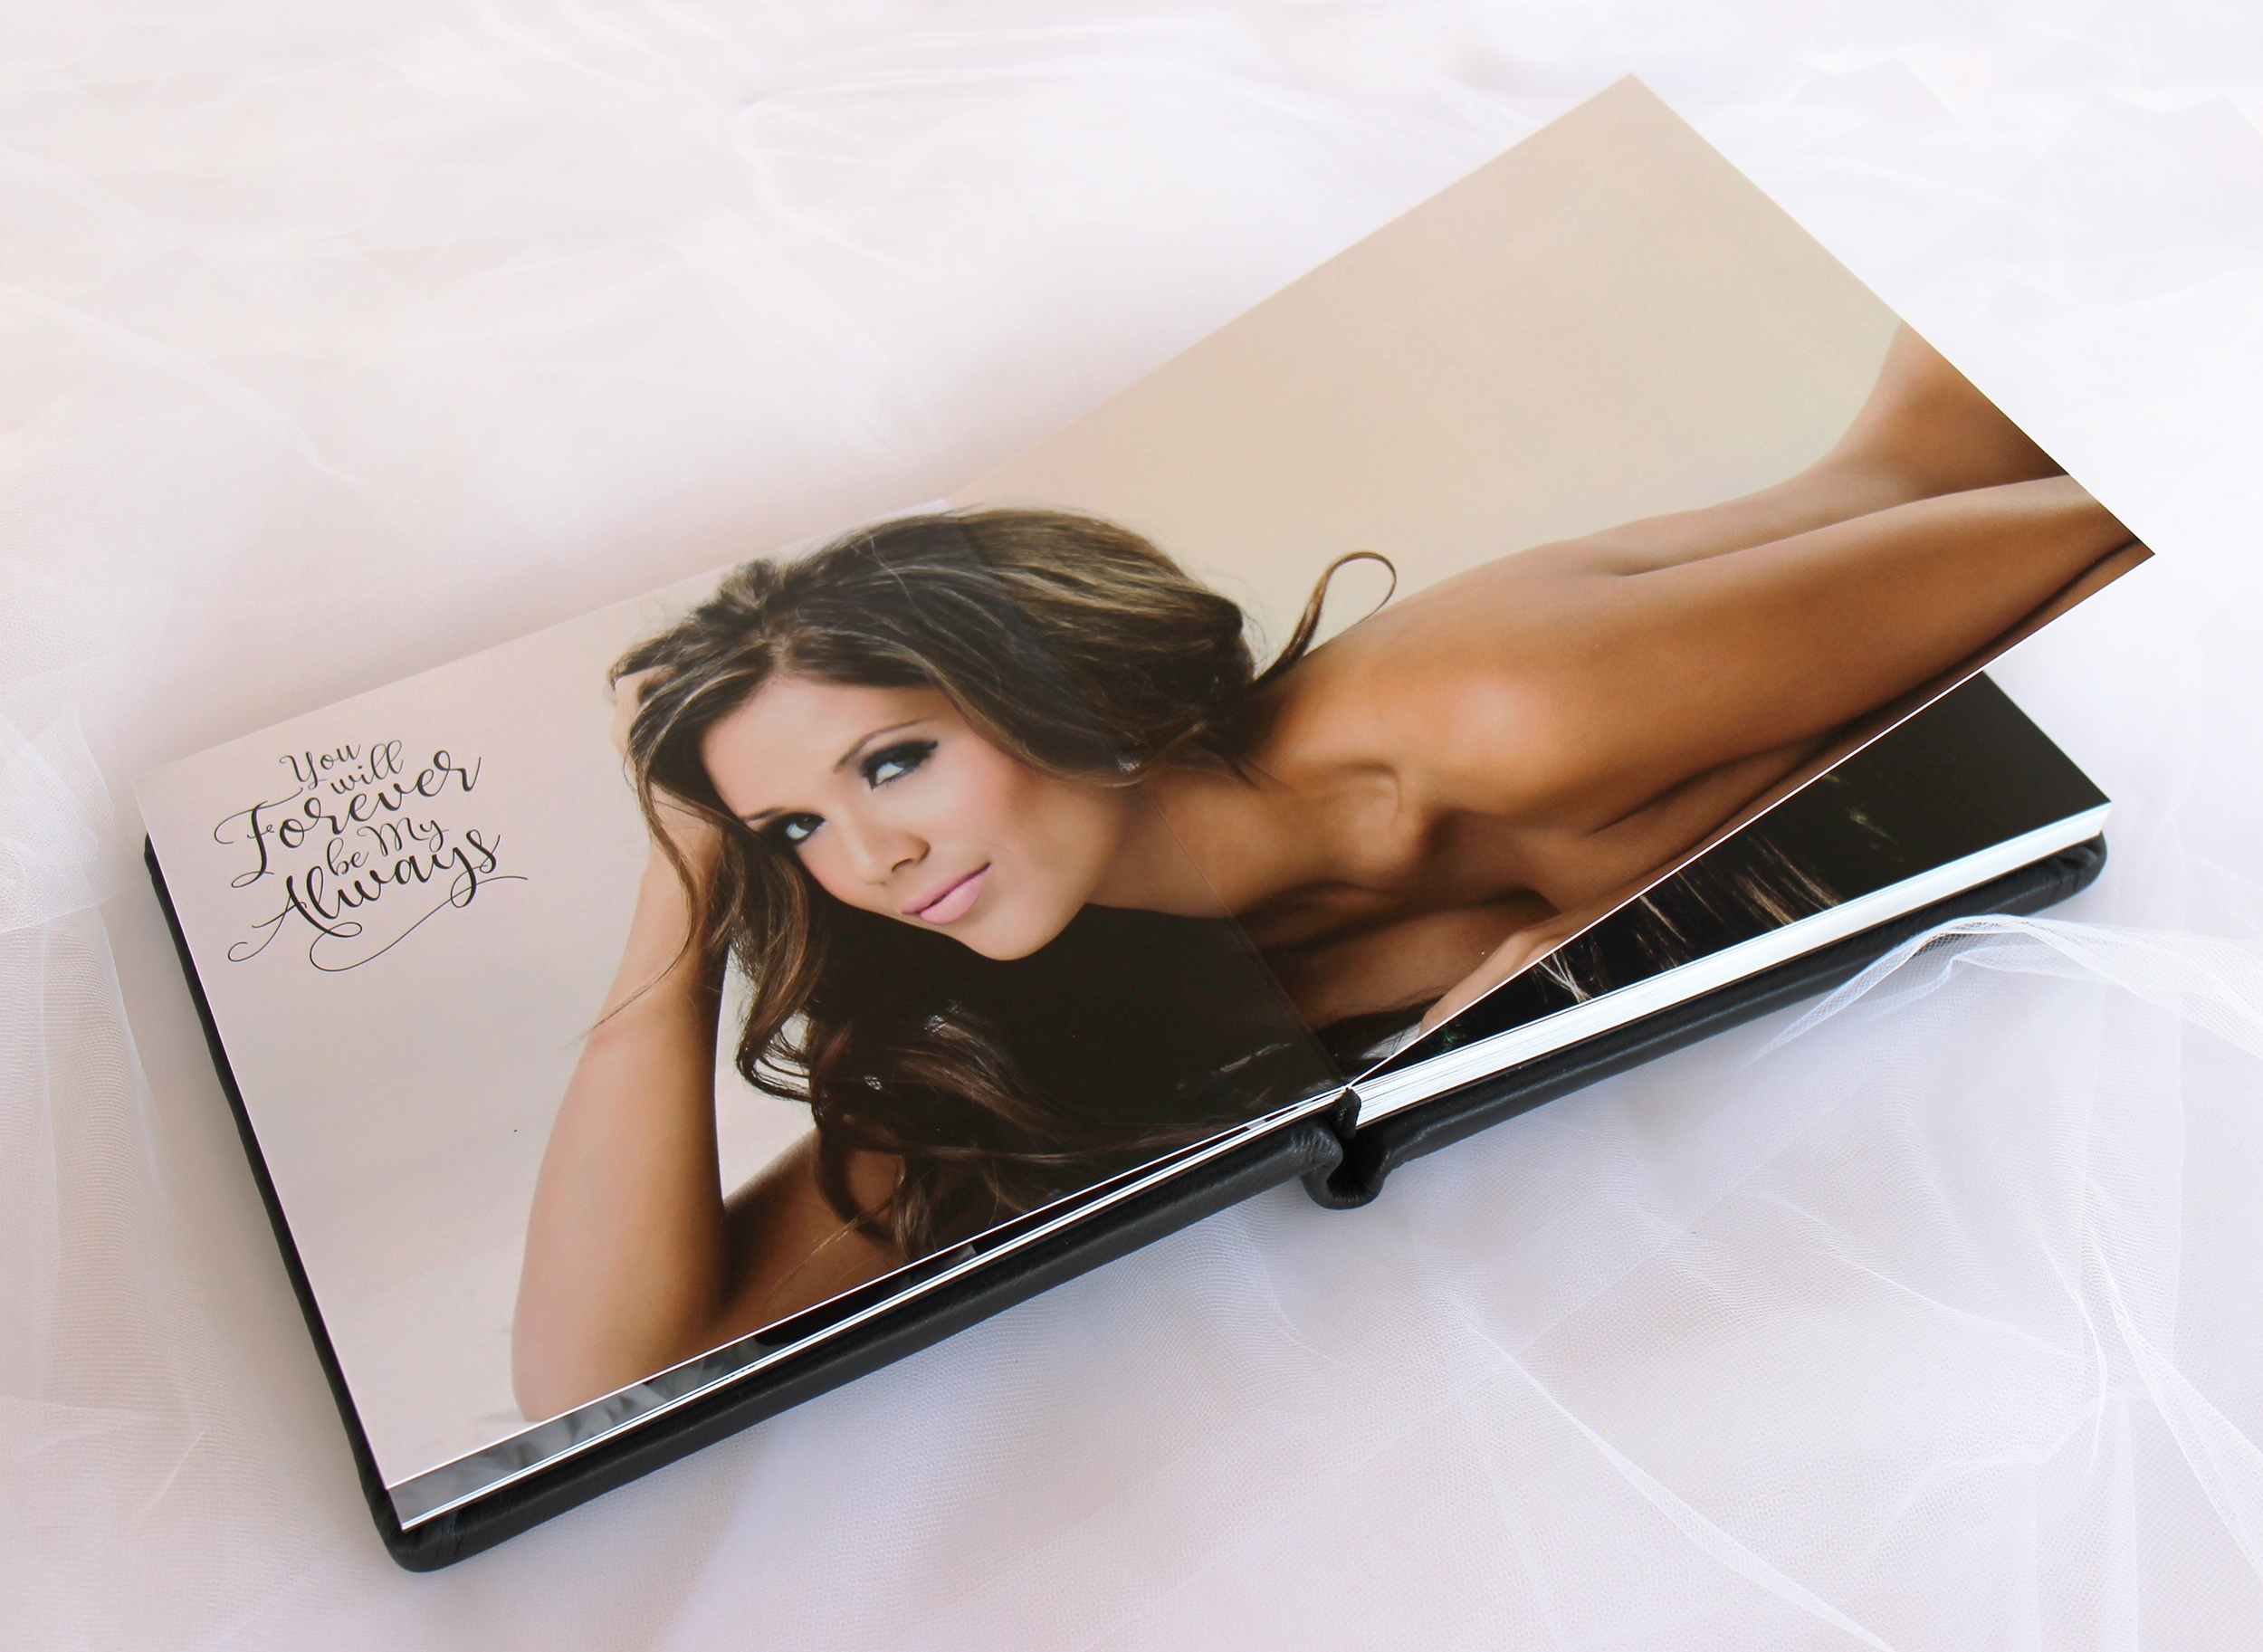 How to make your own boudoir book